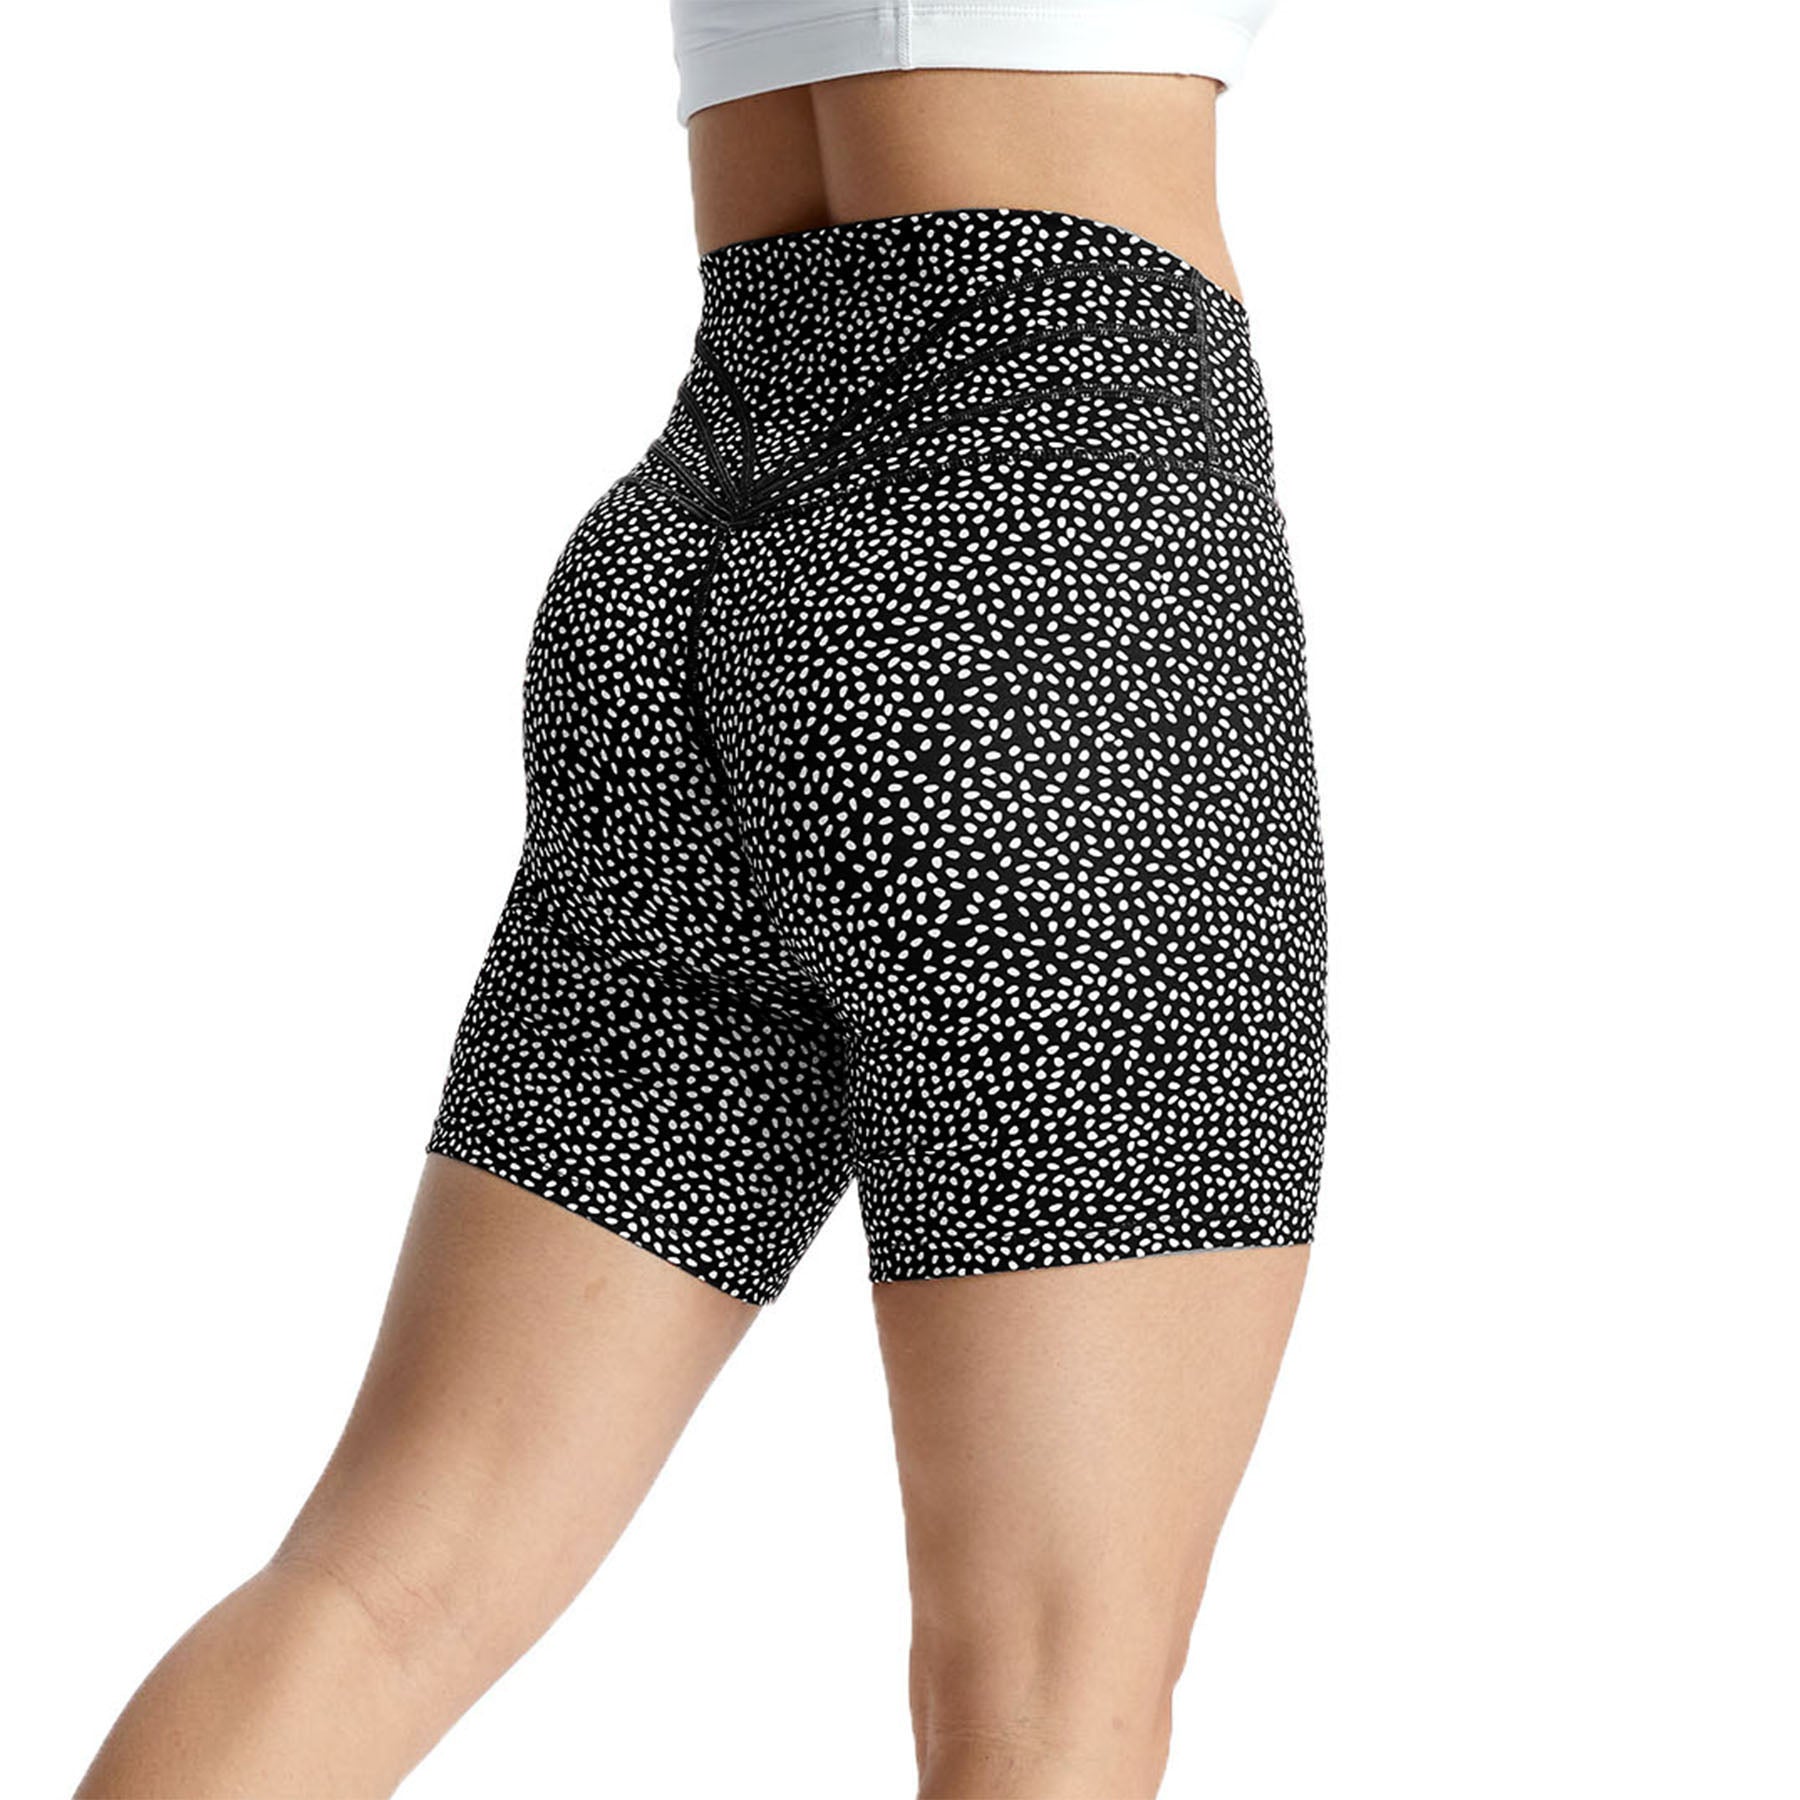 Aoxjox "Patterned" Trinity 6" Shorts